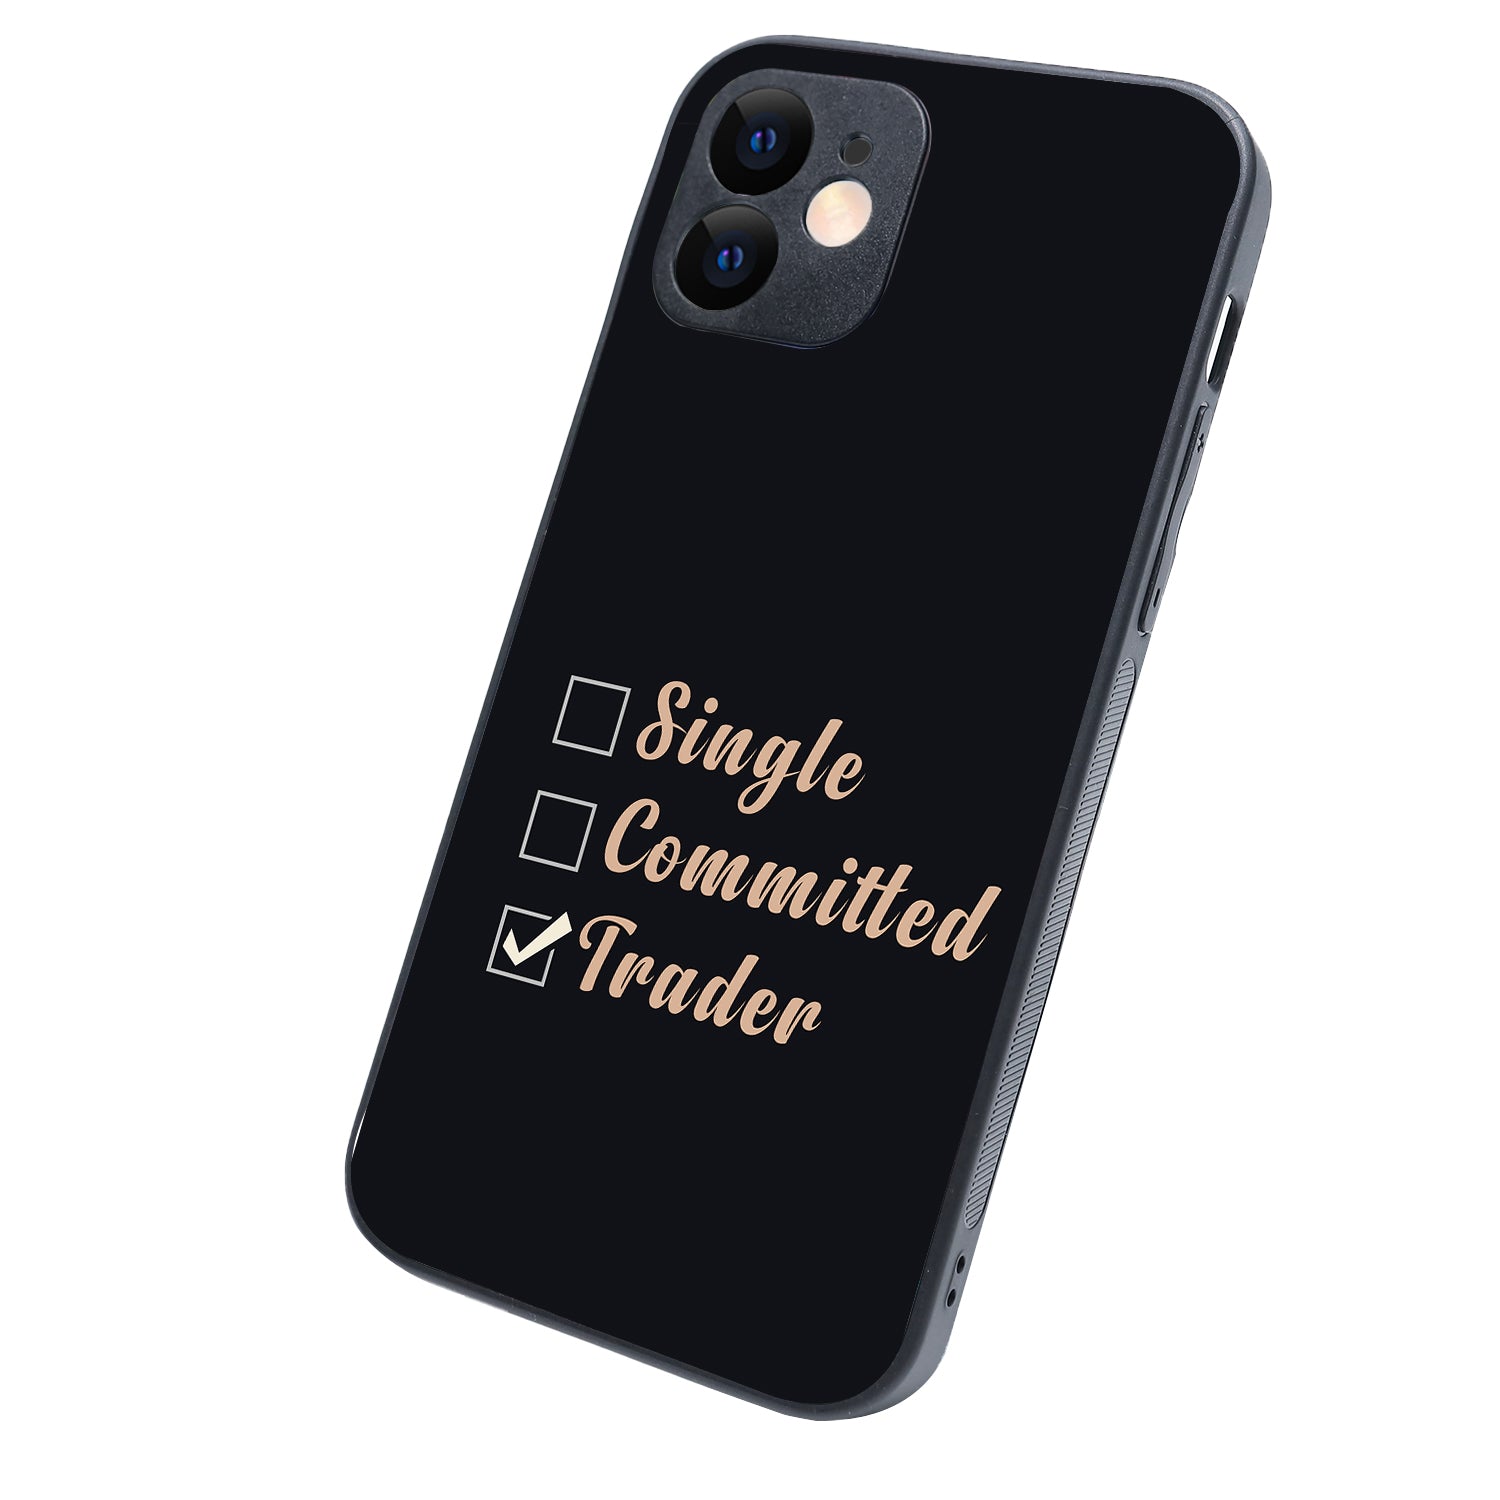 Single, Commited, Trader Trading iPhone 12 Case